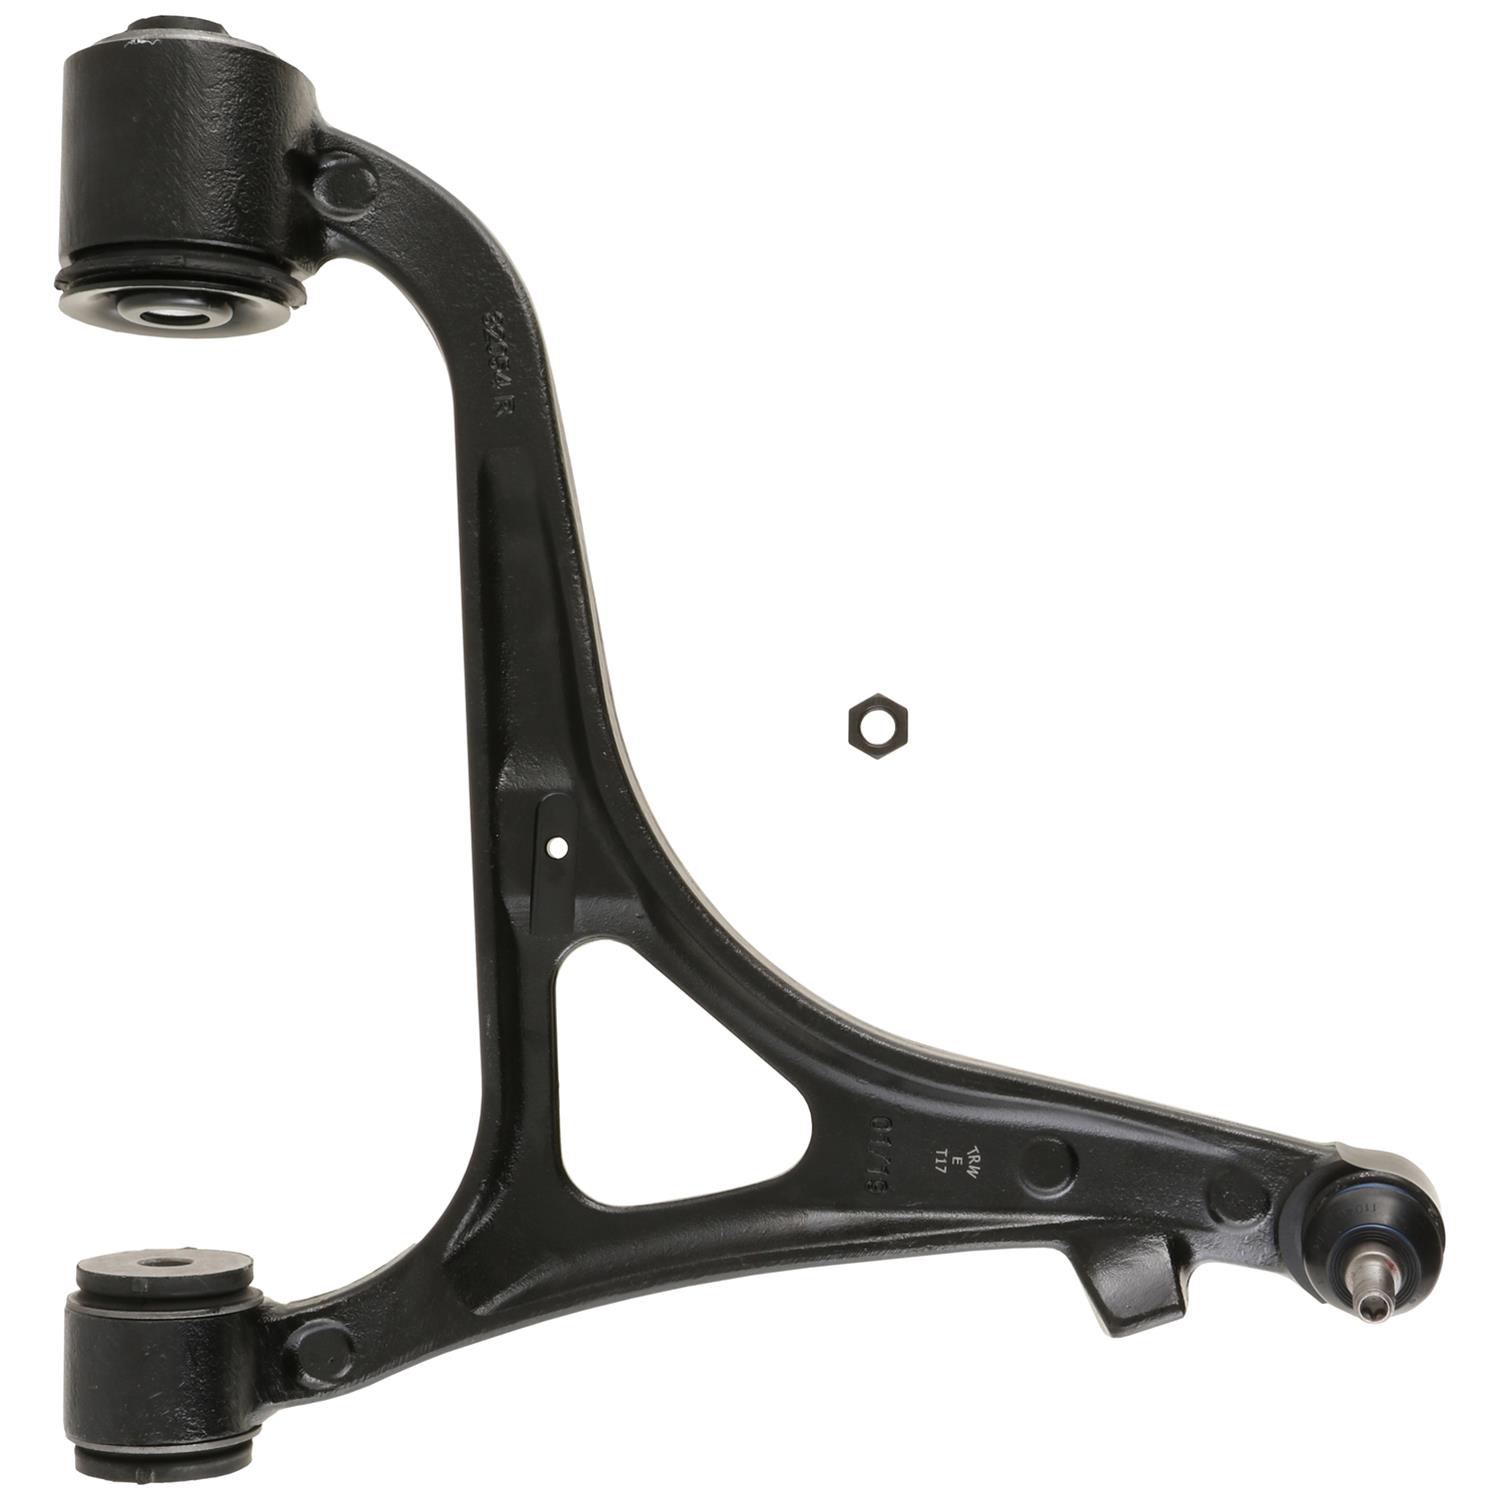 TRW Automotive JTC2631 TRW Replacement Control Arms | Summit Racing